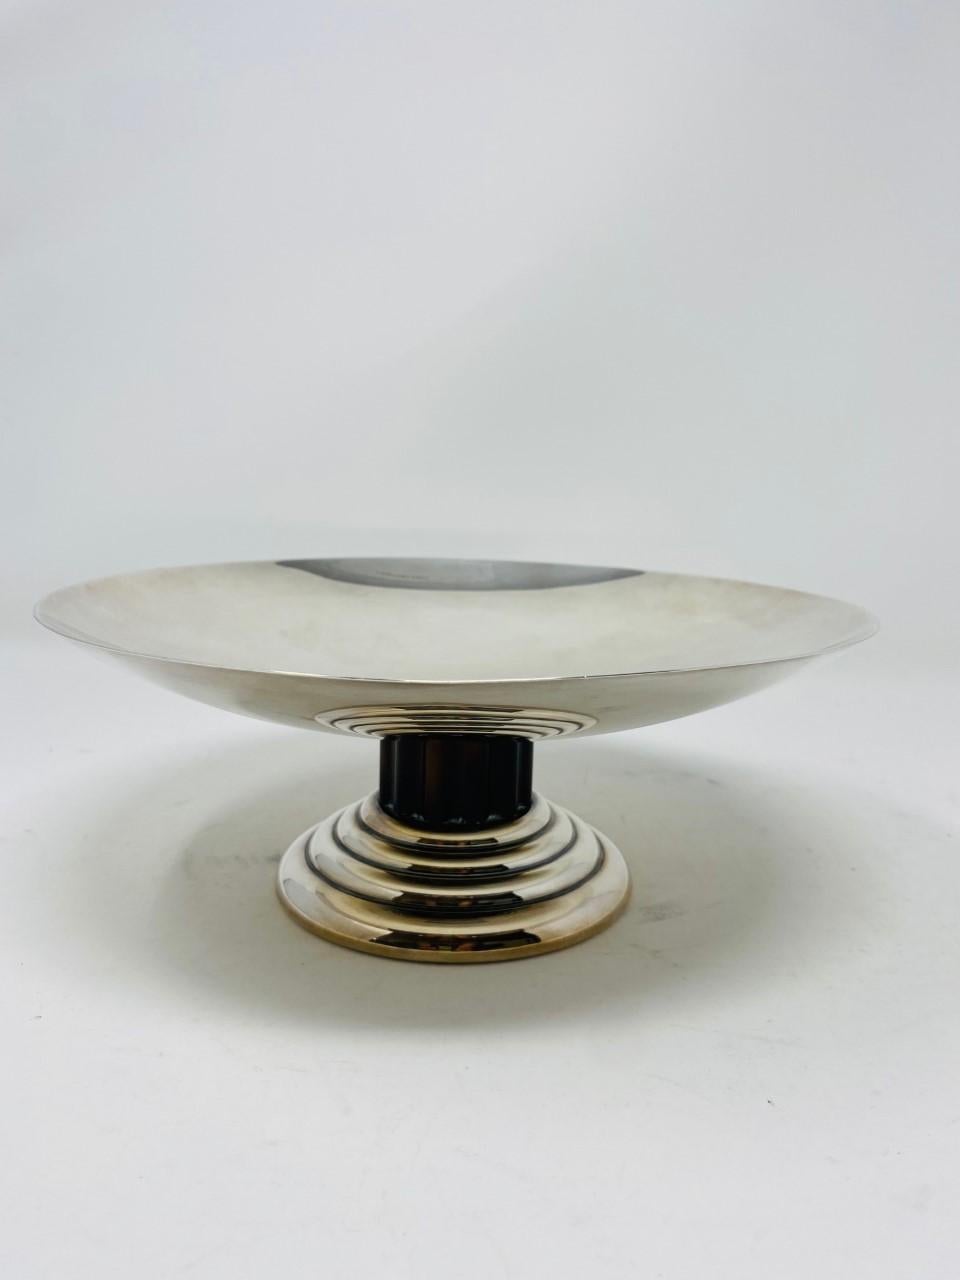 Incredibly elegant silver plate coupe bowl/tazza by Puiforcat, France. Jean Puiforcat designed this elegant piece in the 1930s, the Art Deco period. Puiforcat France continues editing this collection until the 1970s. This perfectly rendered display